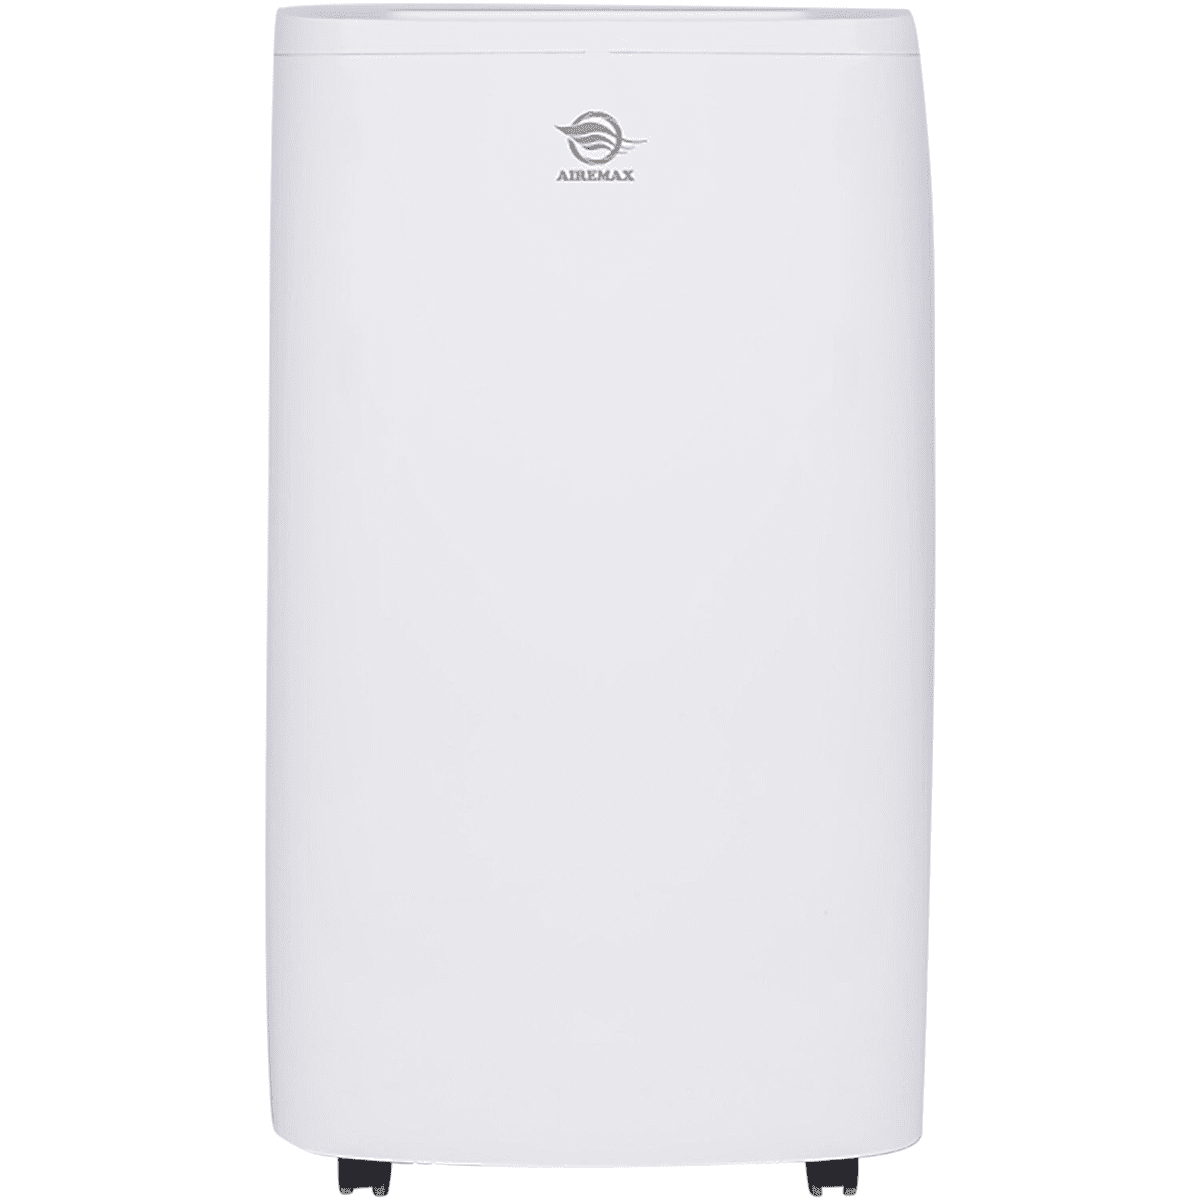 AireMax 10,000 BTU SACC Portable Air Conditioner with Supplemental Heat